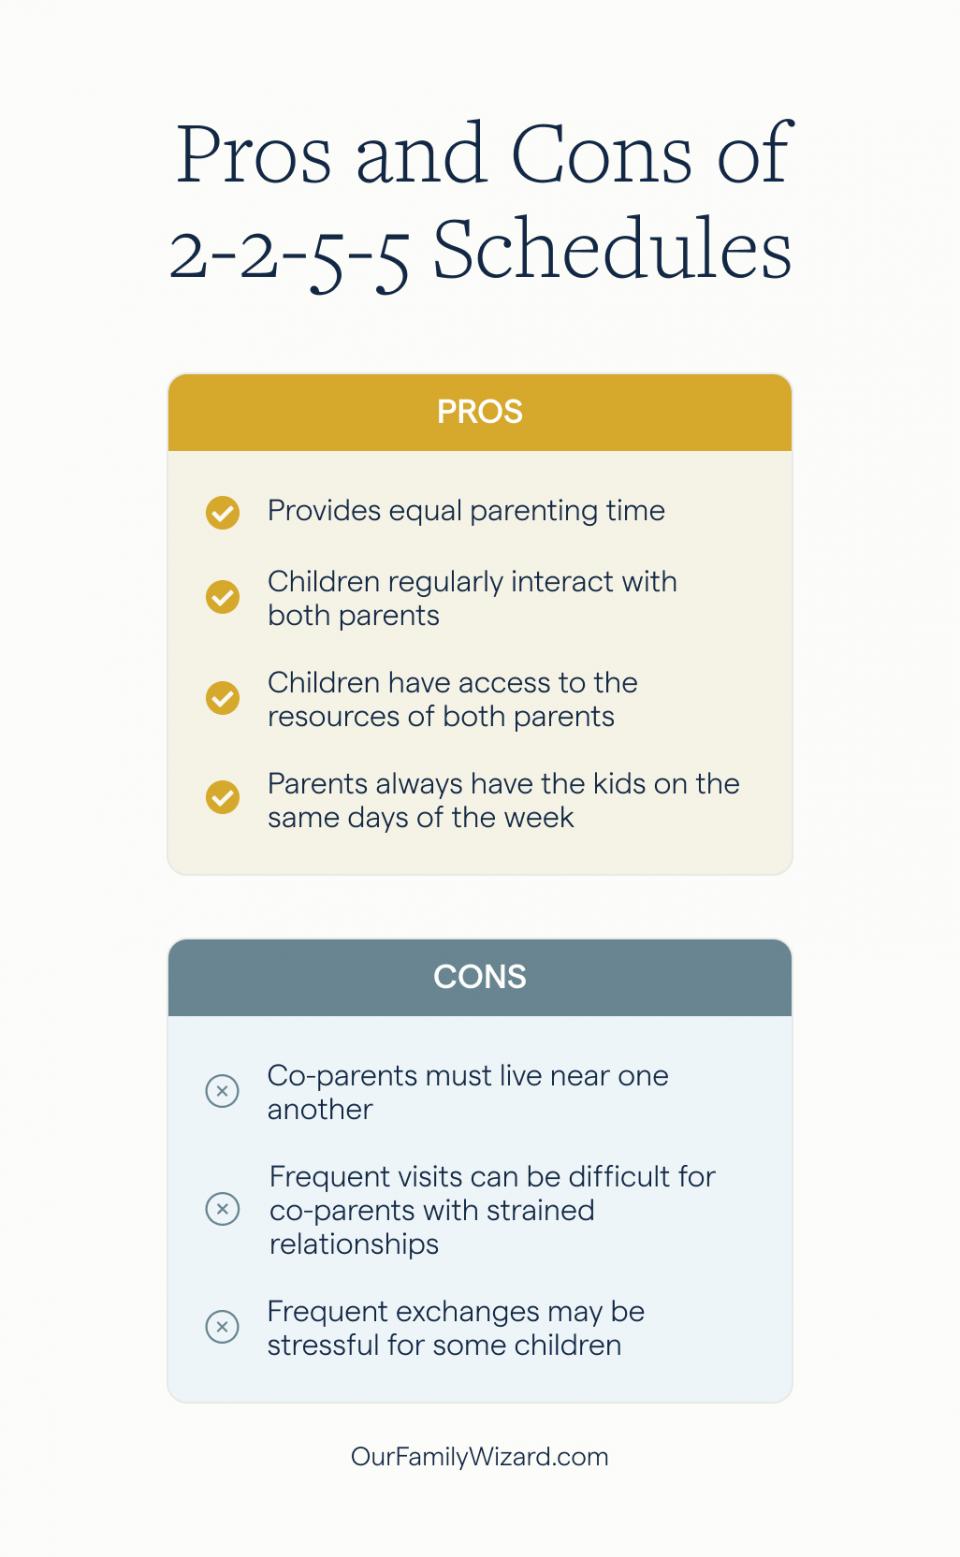 Pros and cons of a 2-2-5-5 parenting schedule